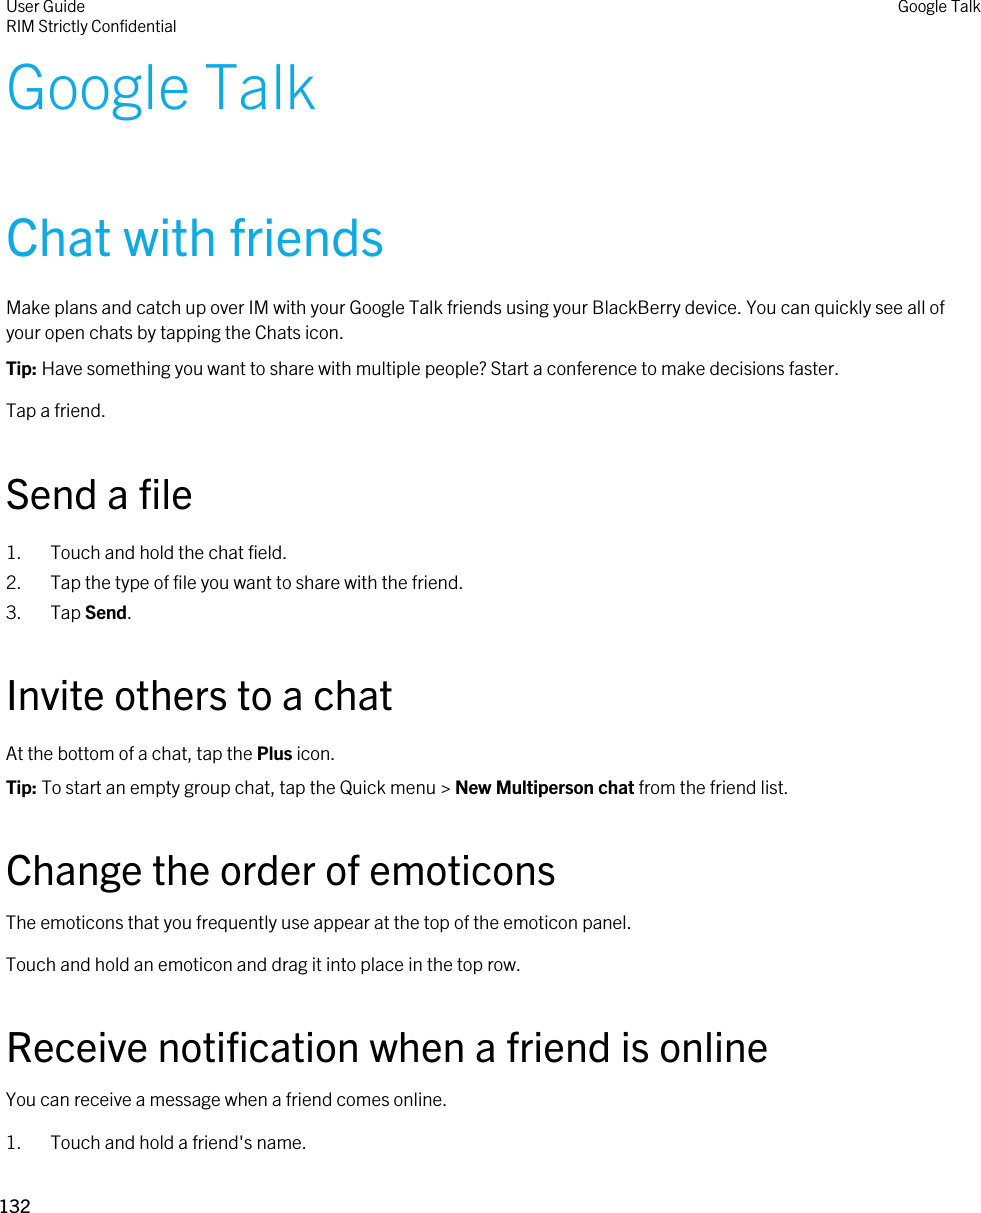 Google TalkChat with friendsMake plans and catch up over IM with your Google Talk friends using your BlackBerry device. You can quickly see all of your open chats by tapping the Chats icon.Tip: Have something you want to share with multiple people? Start a conference to make decisions faster.Tap a friend.Send a file1. Touch and hold the chat field.2. Tap the type of file you want to share with the friend.3. Tap Send.Invite others to a chatAt the bottom of a chat, tap the Plus icon.Tip: To start an empty group chat, tap the Quick menu &gt; New Multiperson chat from the friend list.Change the order of emoticonsThe emoticons that you frequently use appear at the top of the emoticon panel.Touch and hold an emoticon and drag it into place in the top row.Receive notification when a friend is onlineYou can receive a message when a friend comes online.1. Touch and hold a friend&apos;s name.User GuideRIM Strictly Confidential Google Talk132 